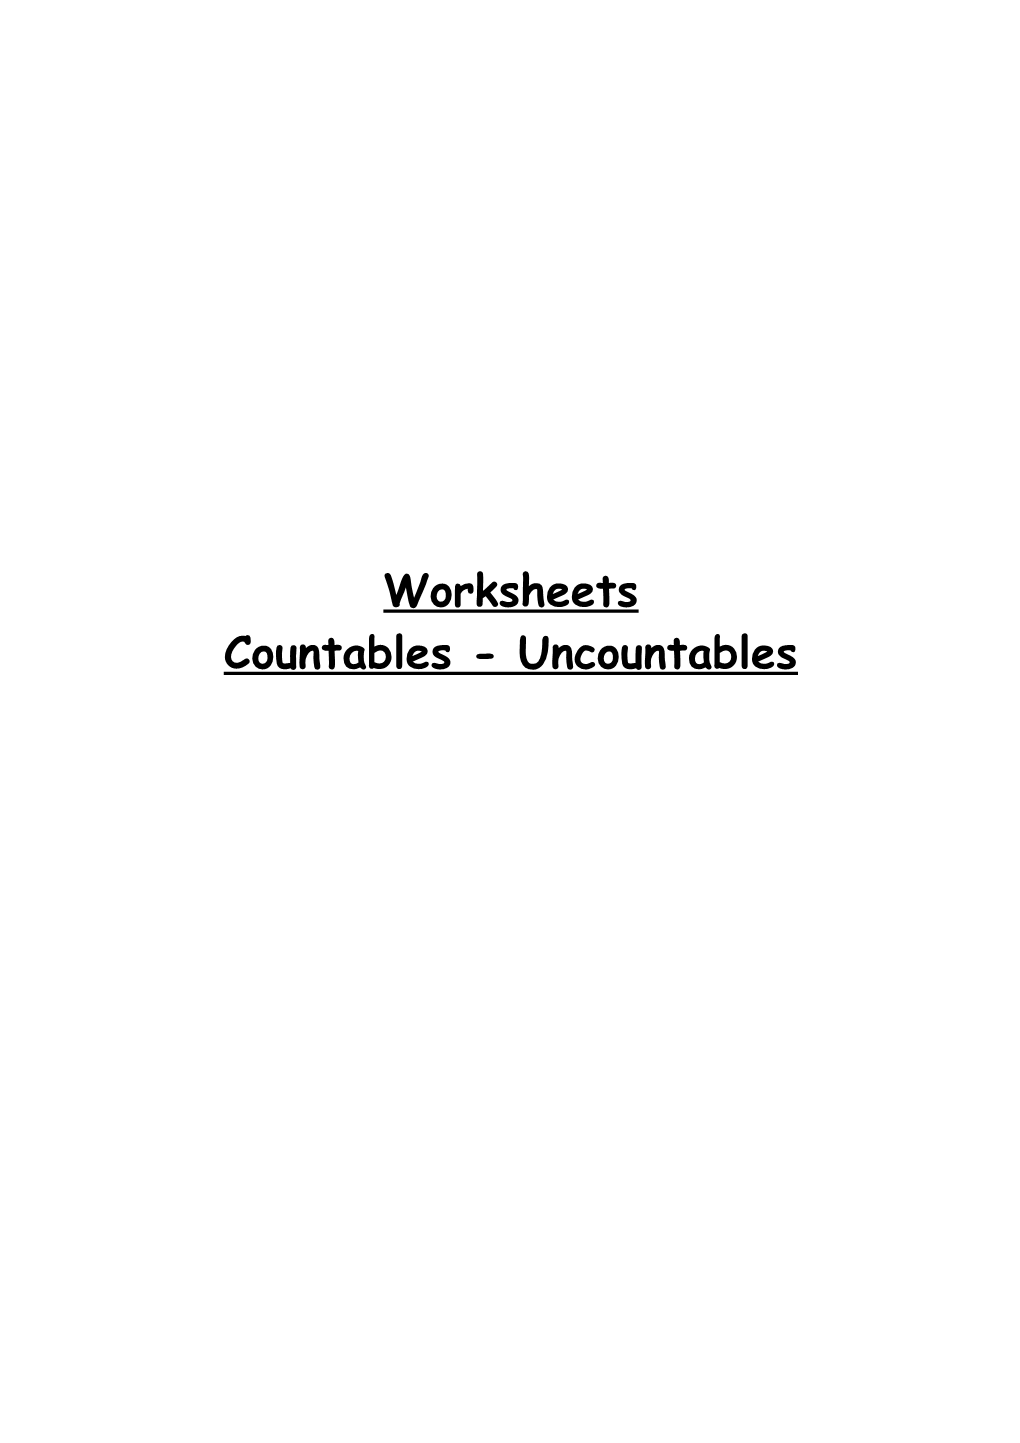 Countables - Uncountables